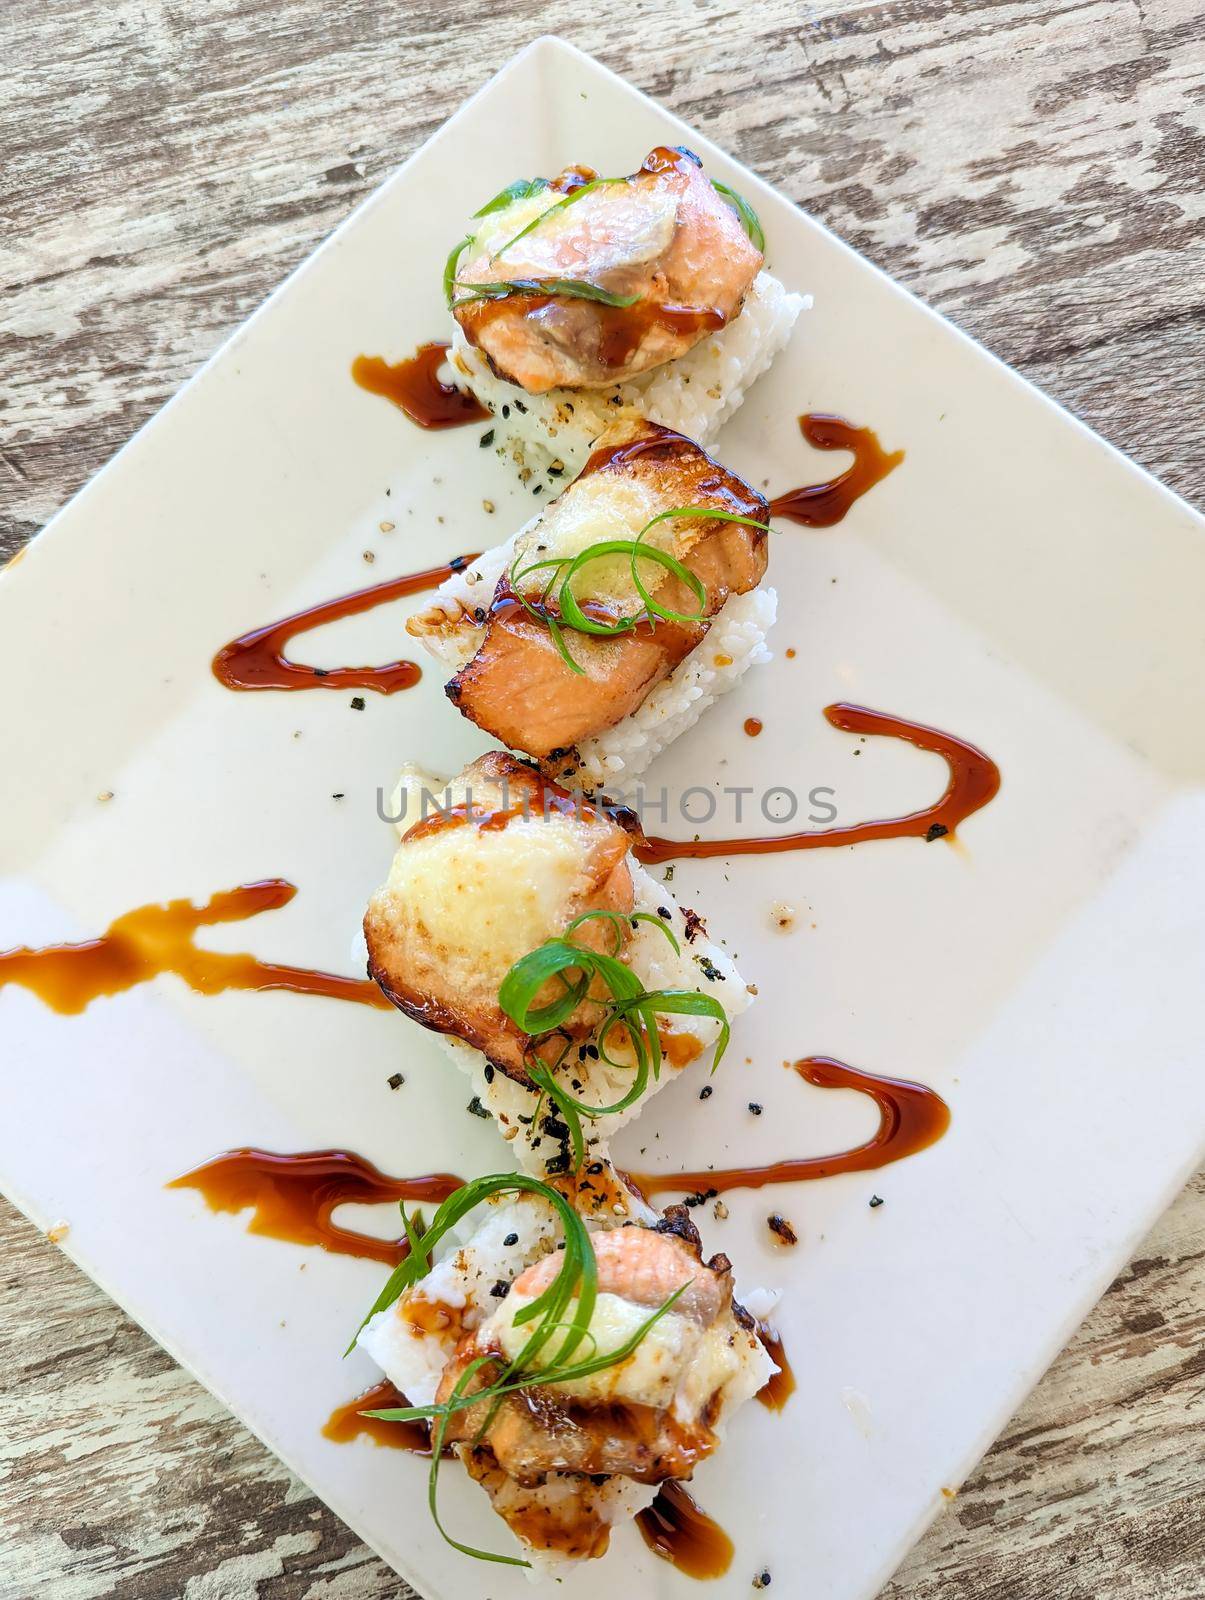 fancy fish dishes in oahu hawaii by digidreamgrafix